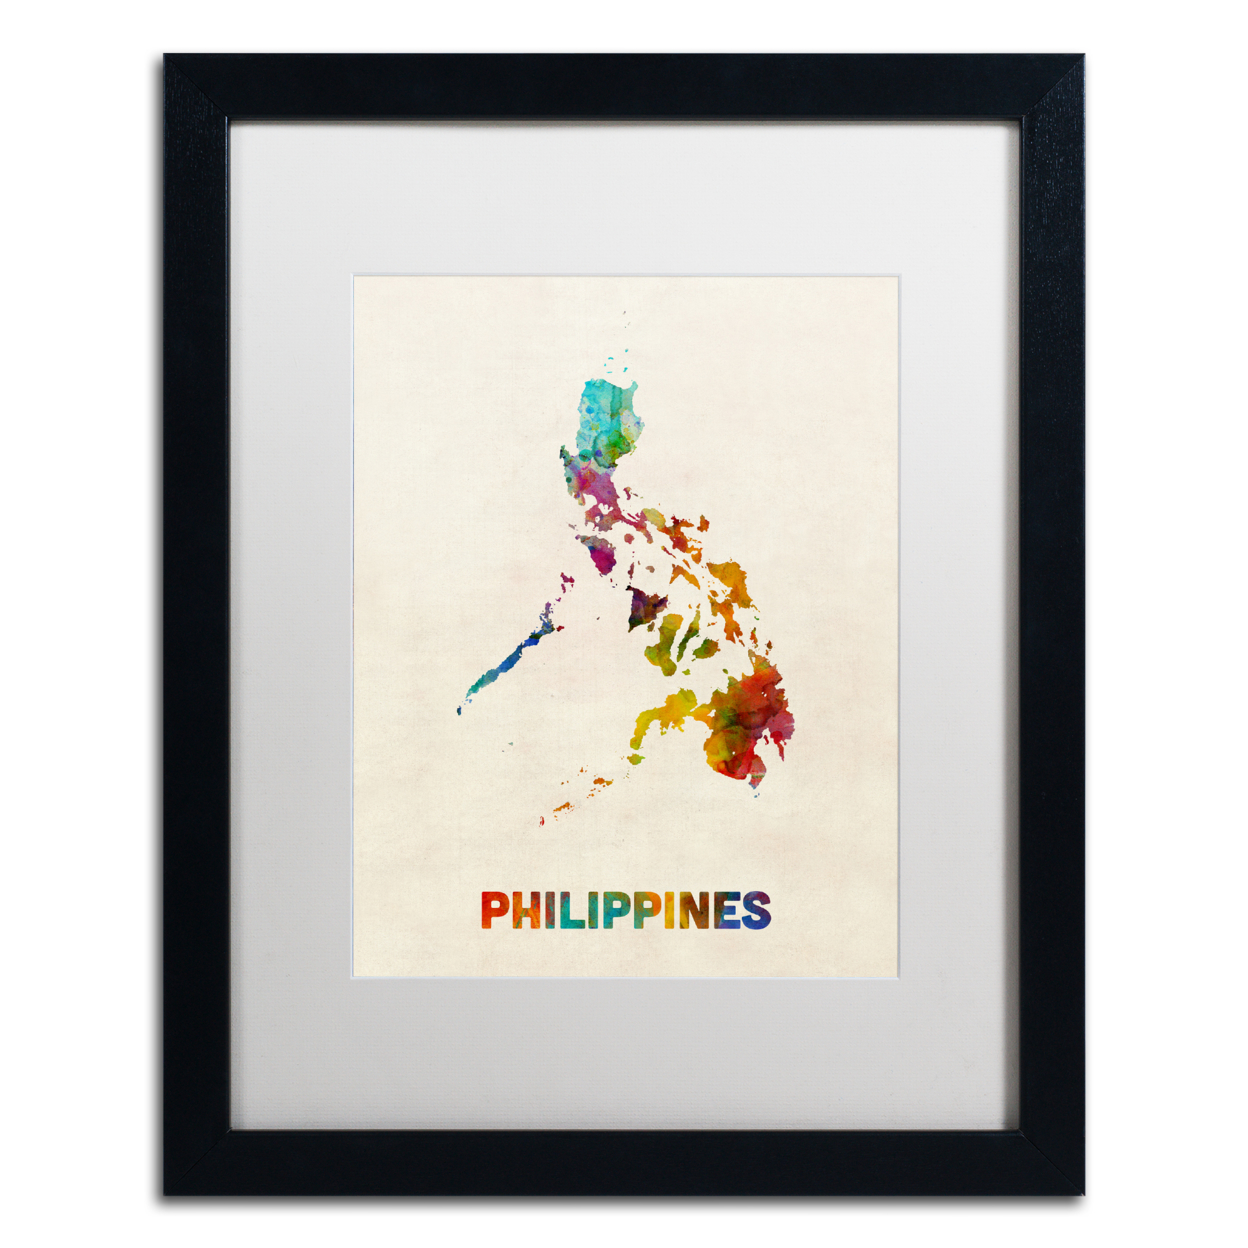 Michael Tompsett 'Philippines Watercolor Map' Black Wooden Framed Art 18 X 22 Inches